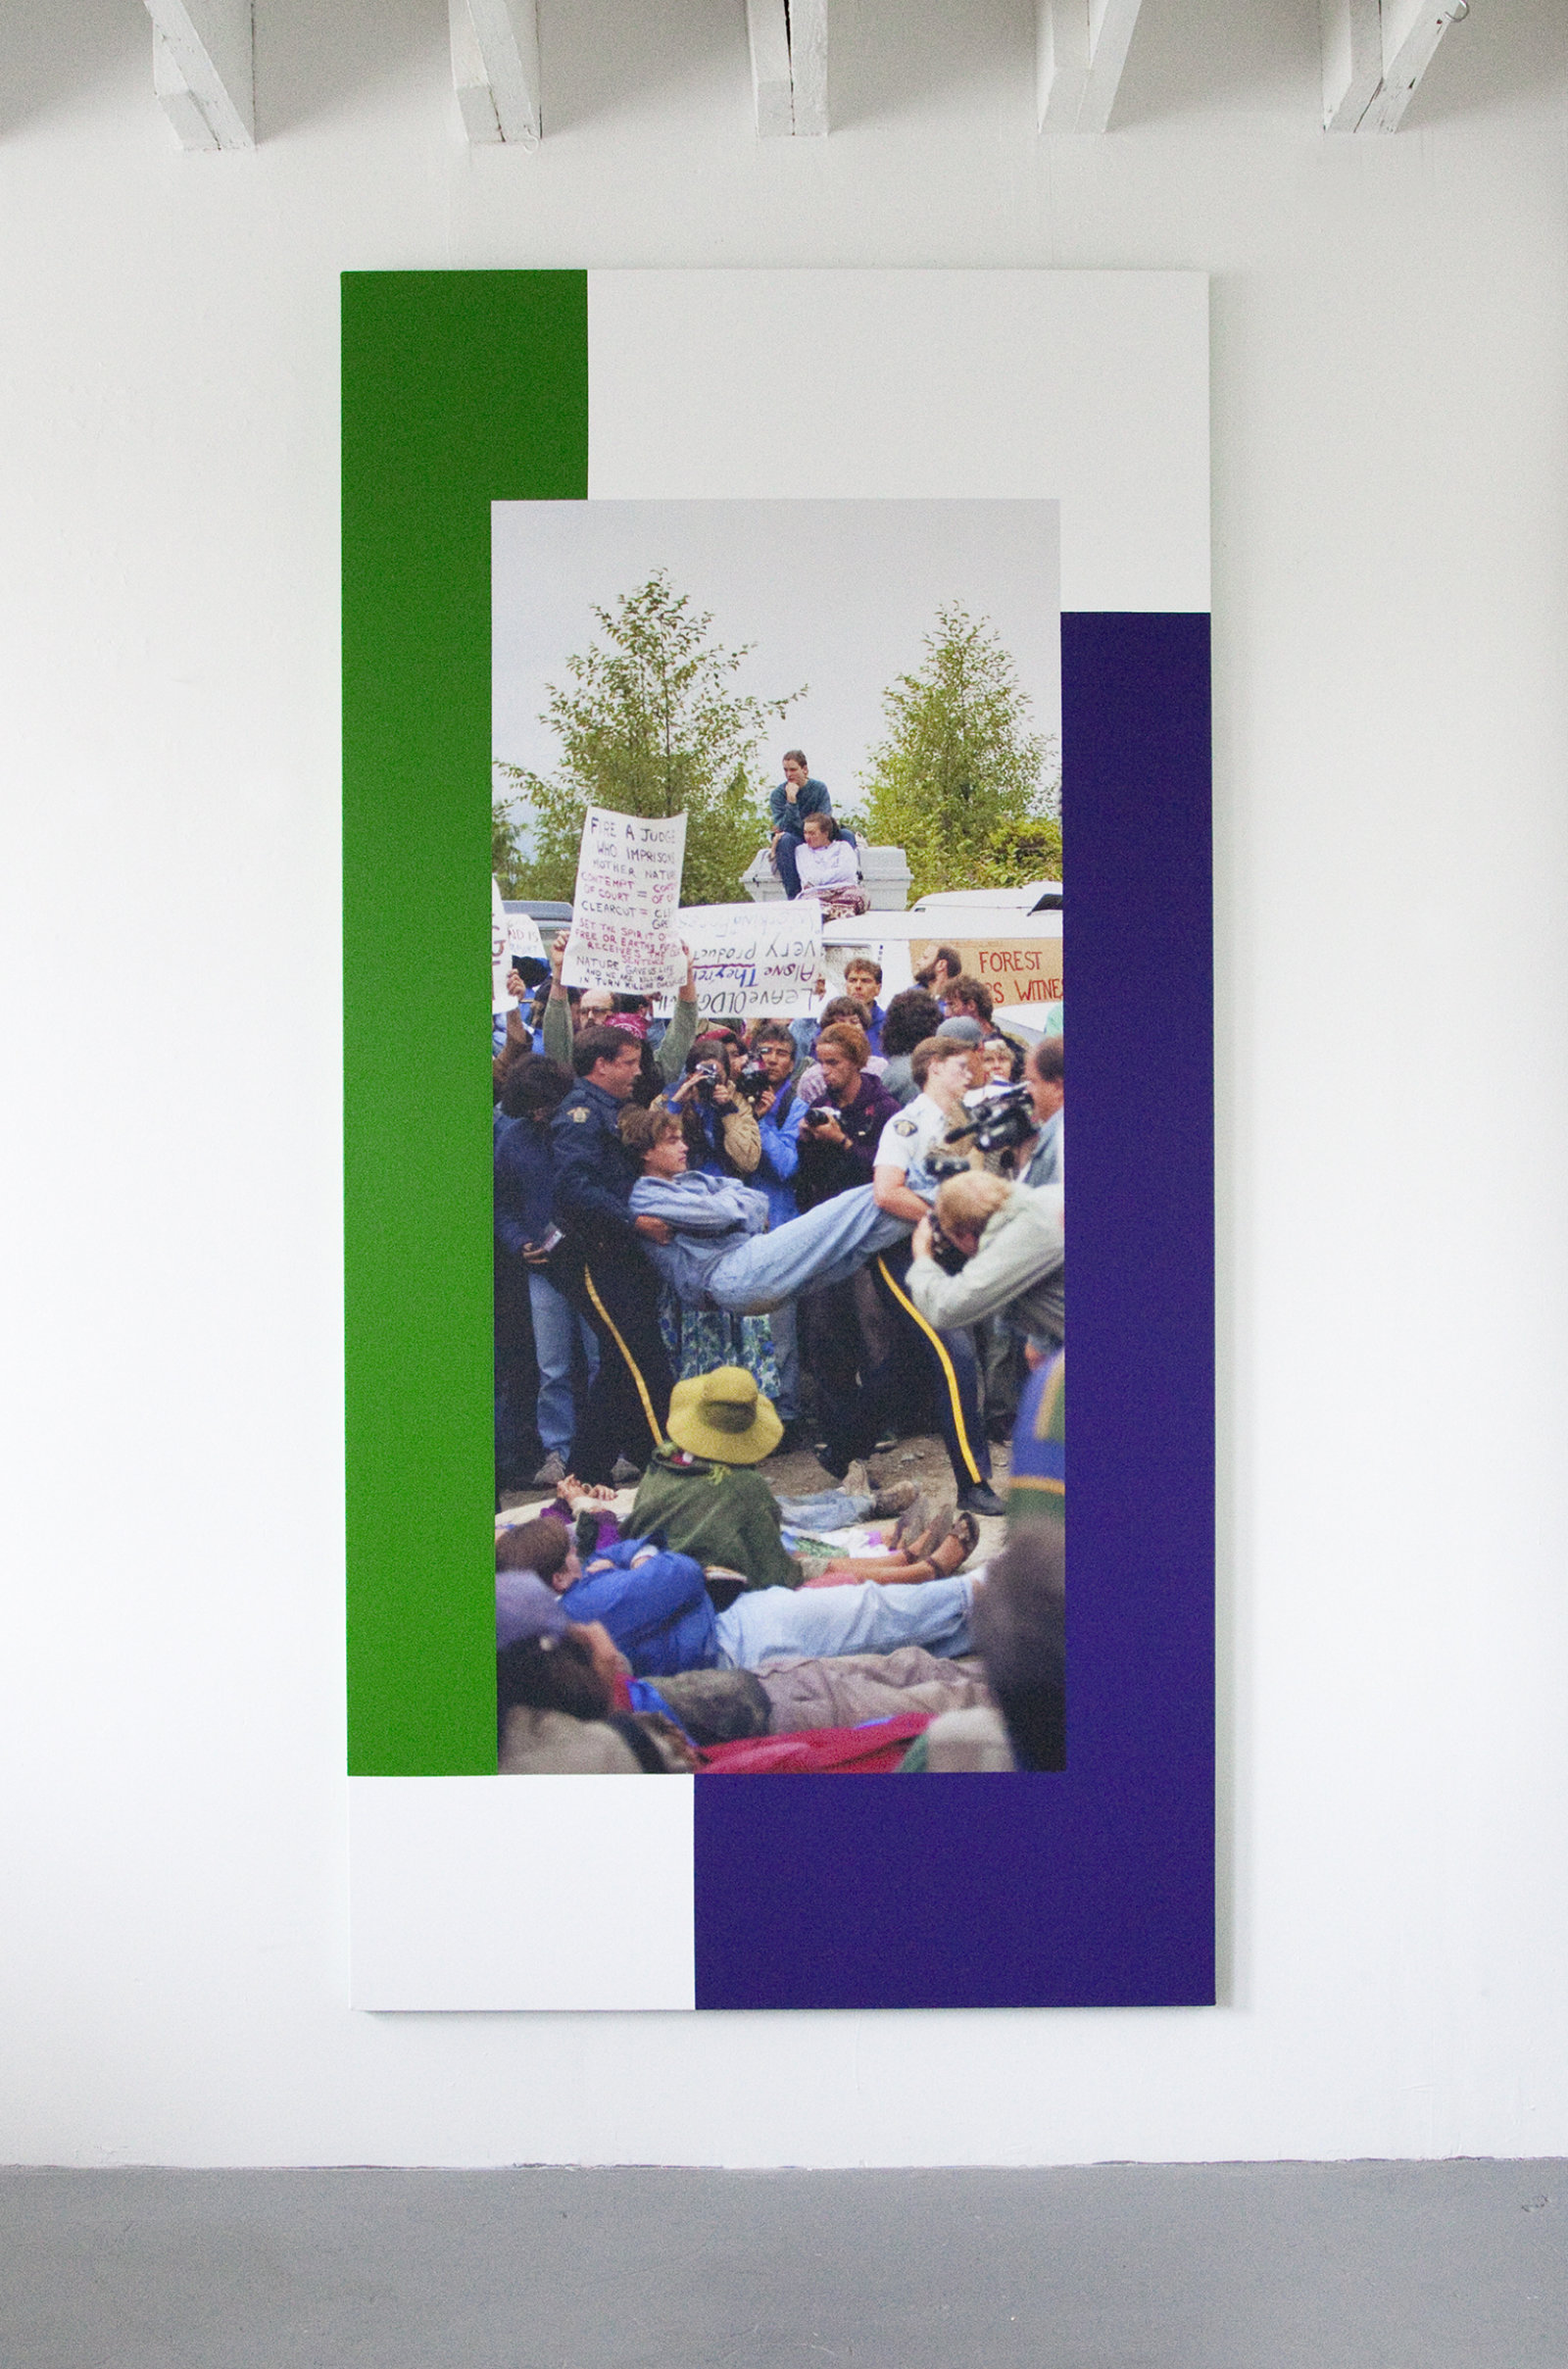 Ian Wallace, The Arrest (Clayoquot Protest August 9, 1993), 2014, photolaminate with acrylic on canvas, 96 x 48 in. (244 x 122 cm)